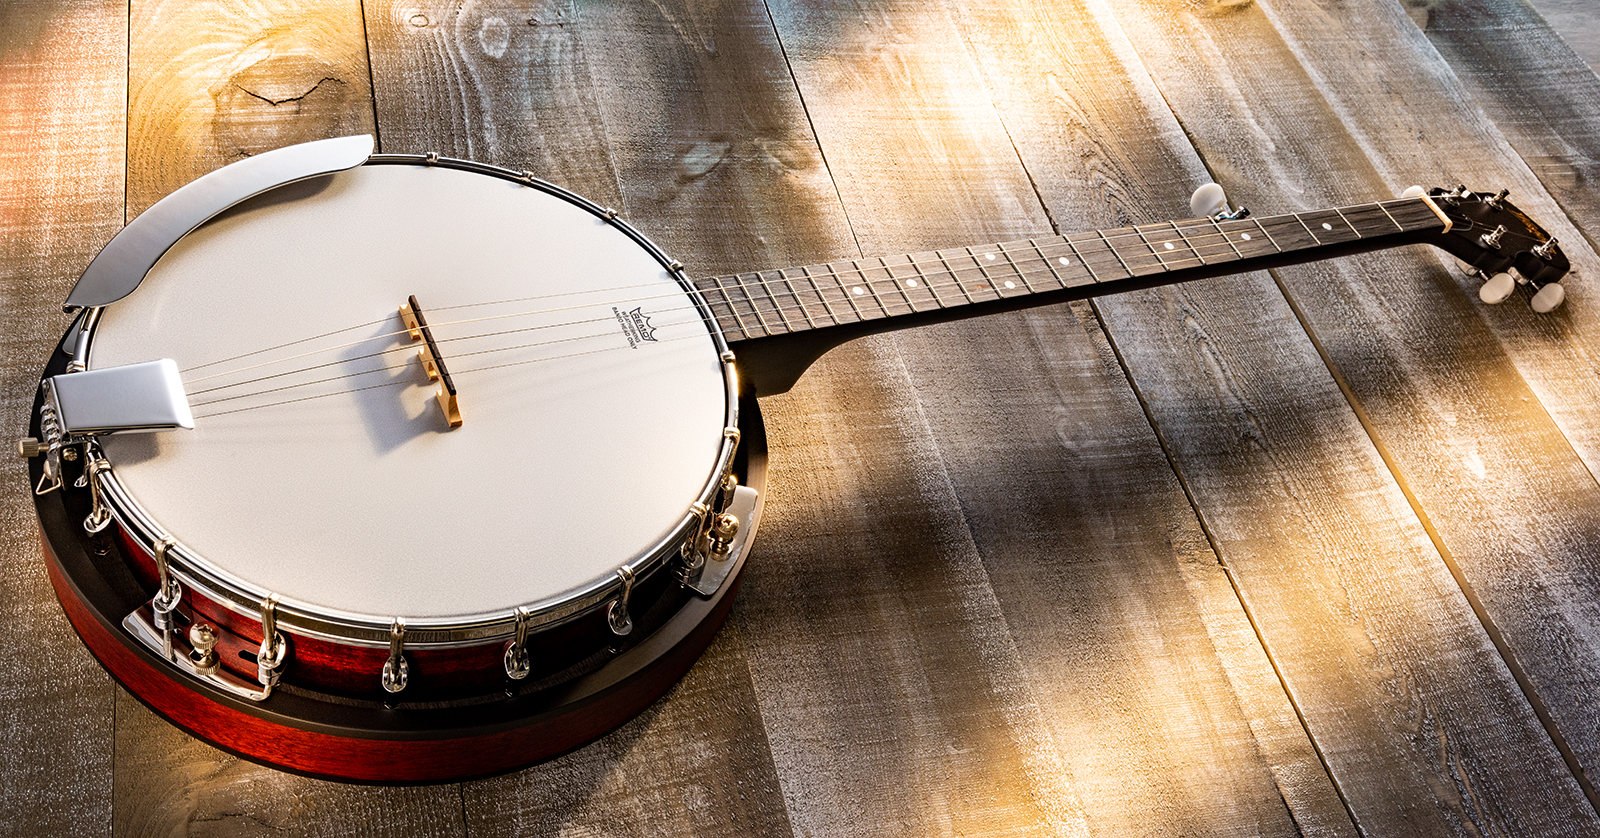 Best Banjos for Beginners at Sweetwater